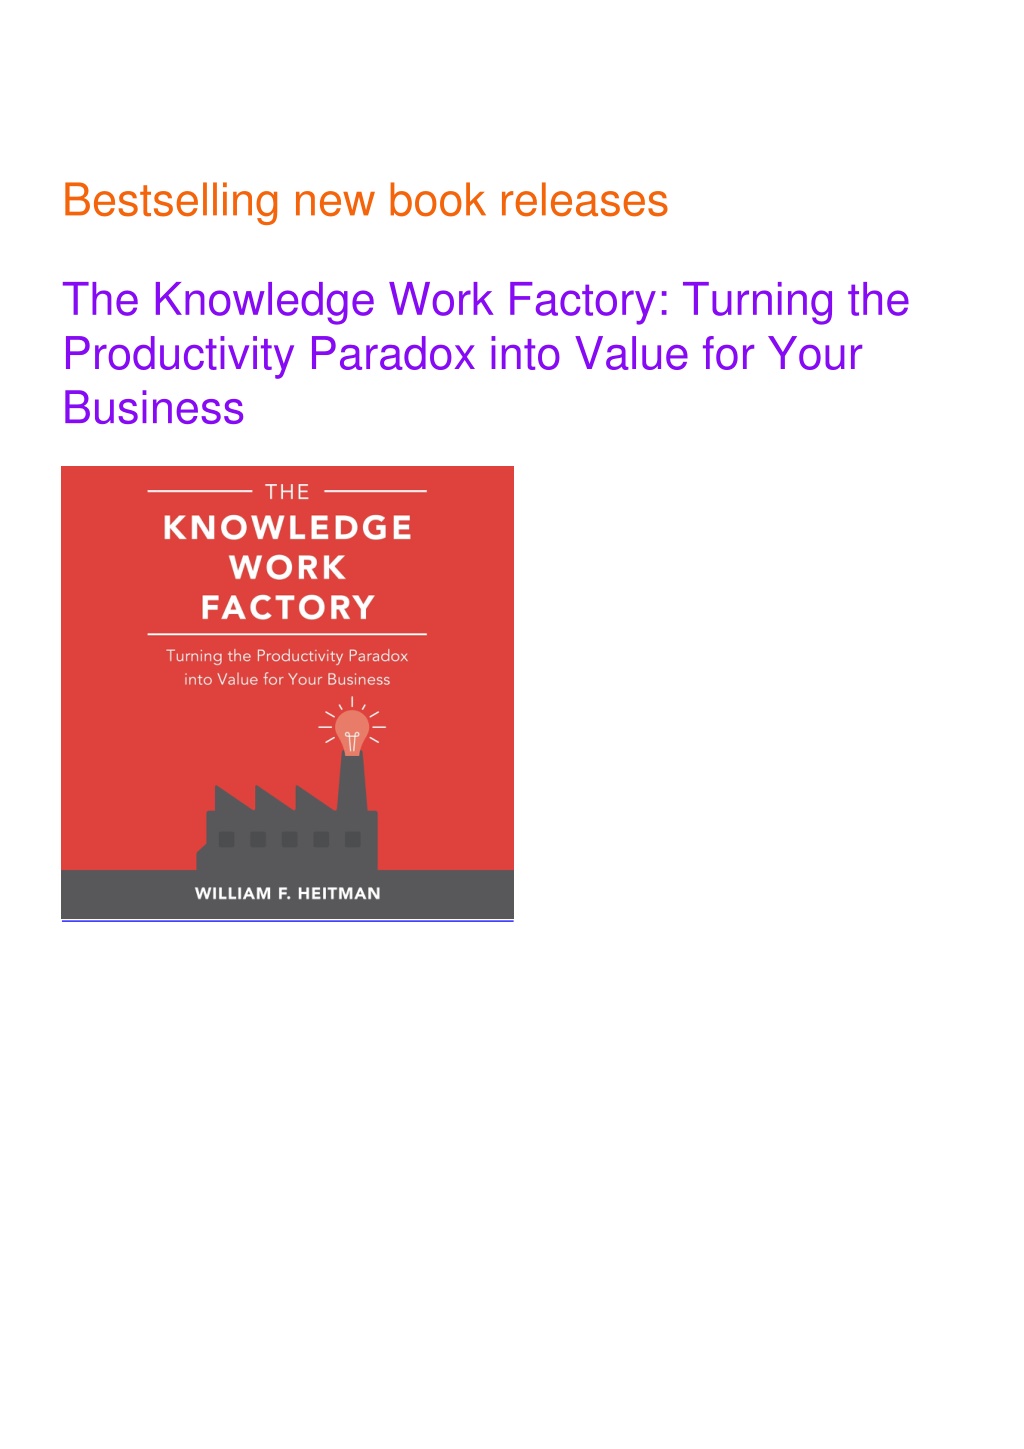 The Knowledge Work Factory: Turning the Productivity Paradox into Value for  Your Business